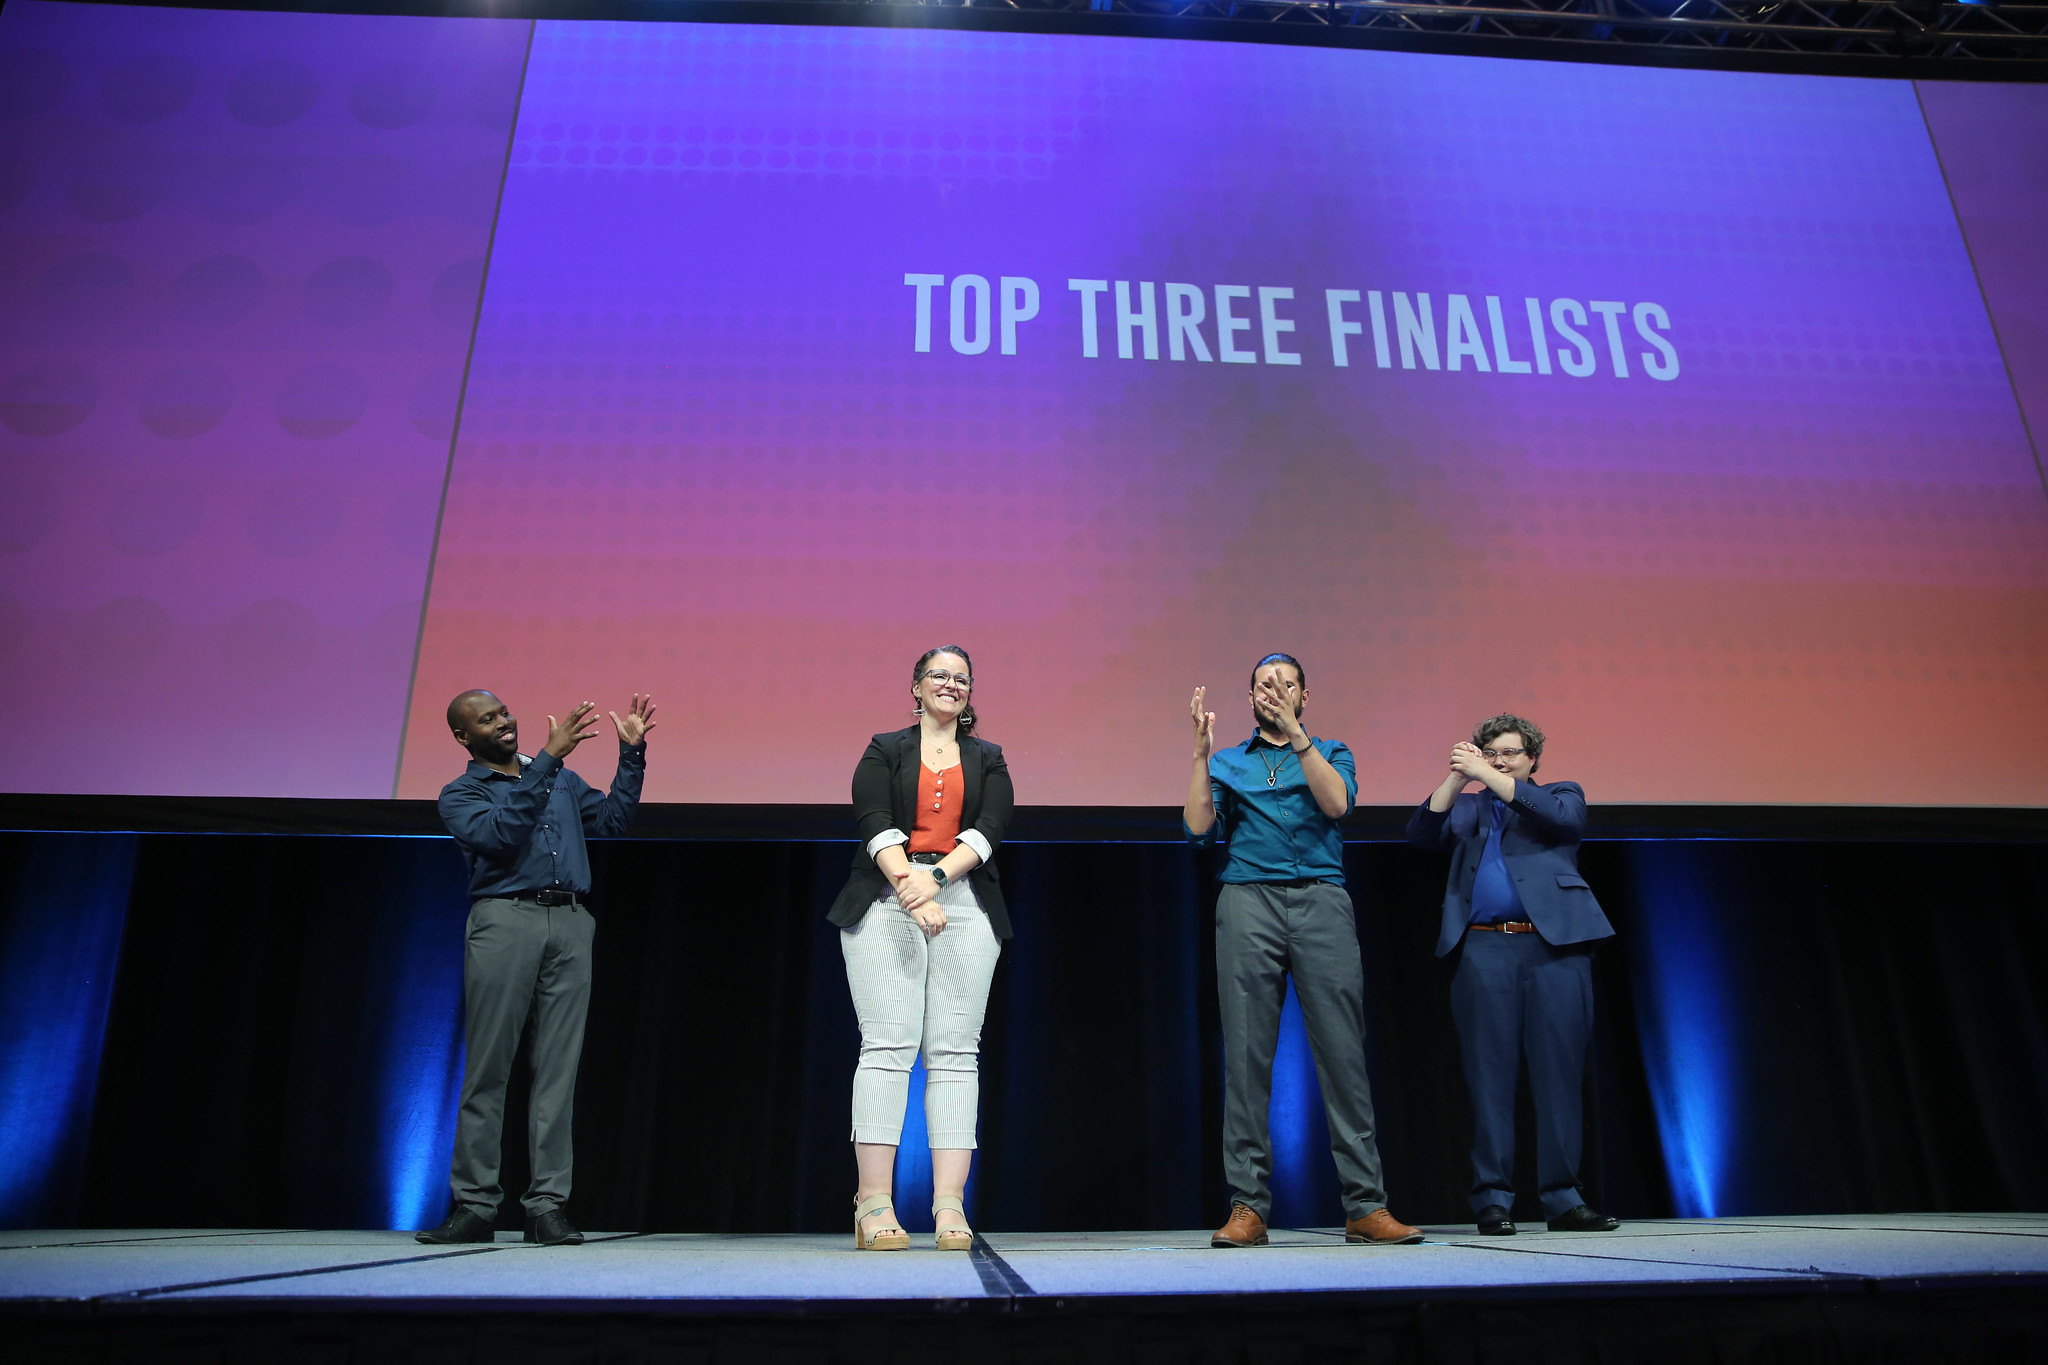 The announcement of three finalists on stage.